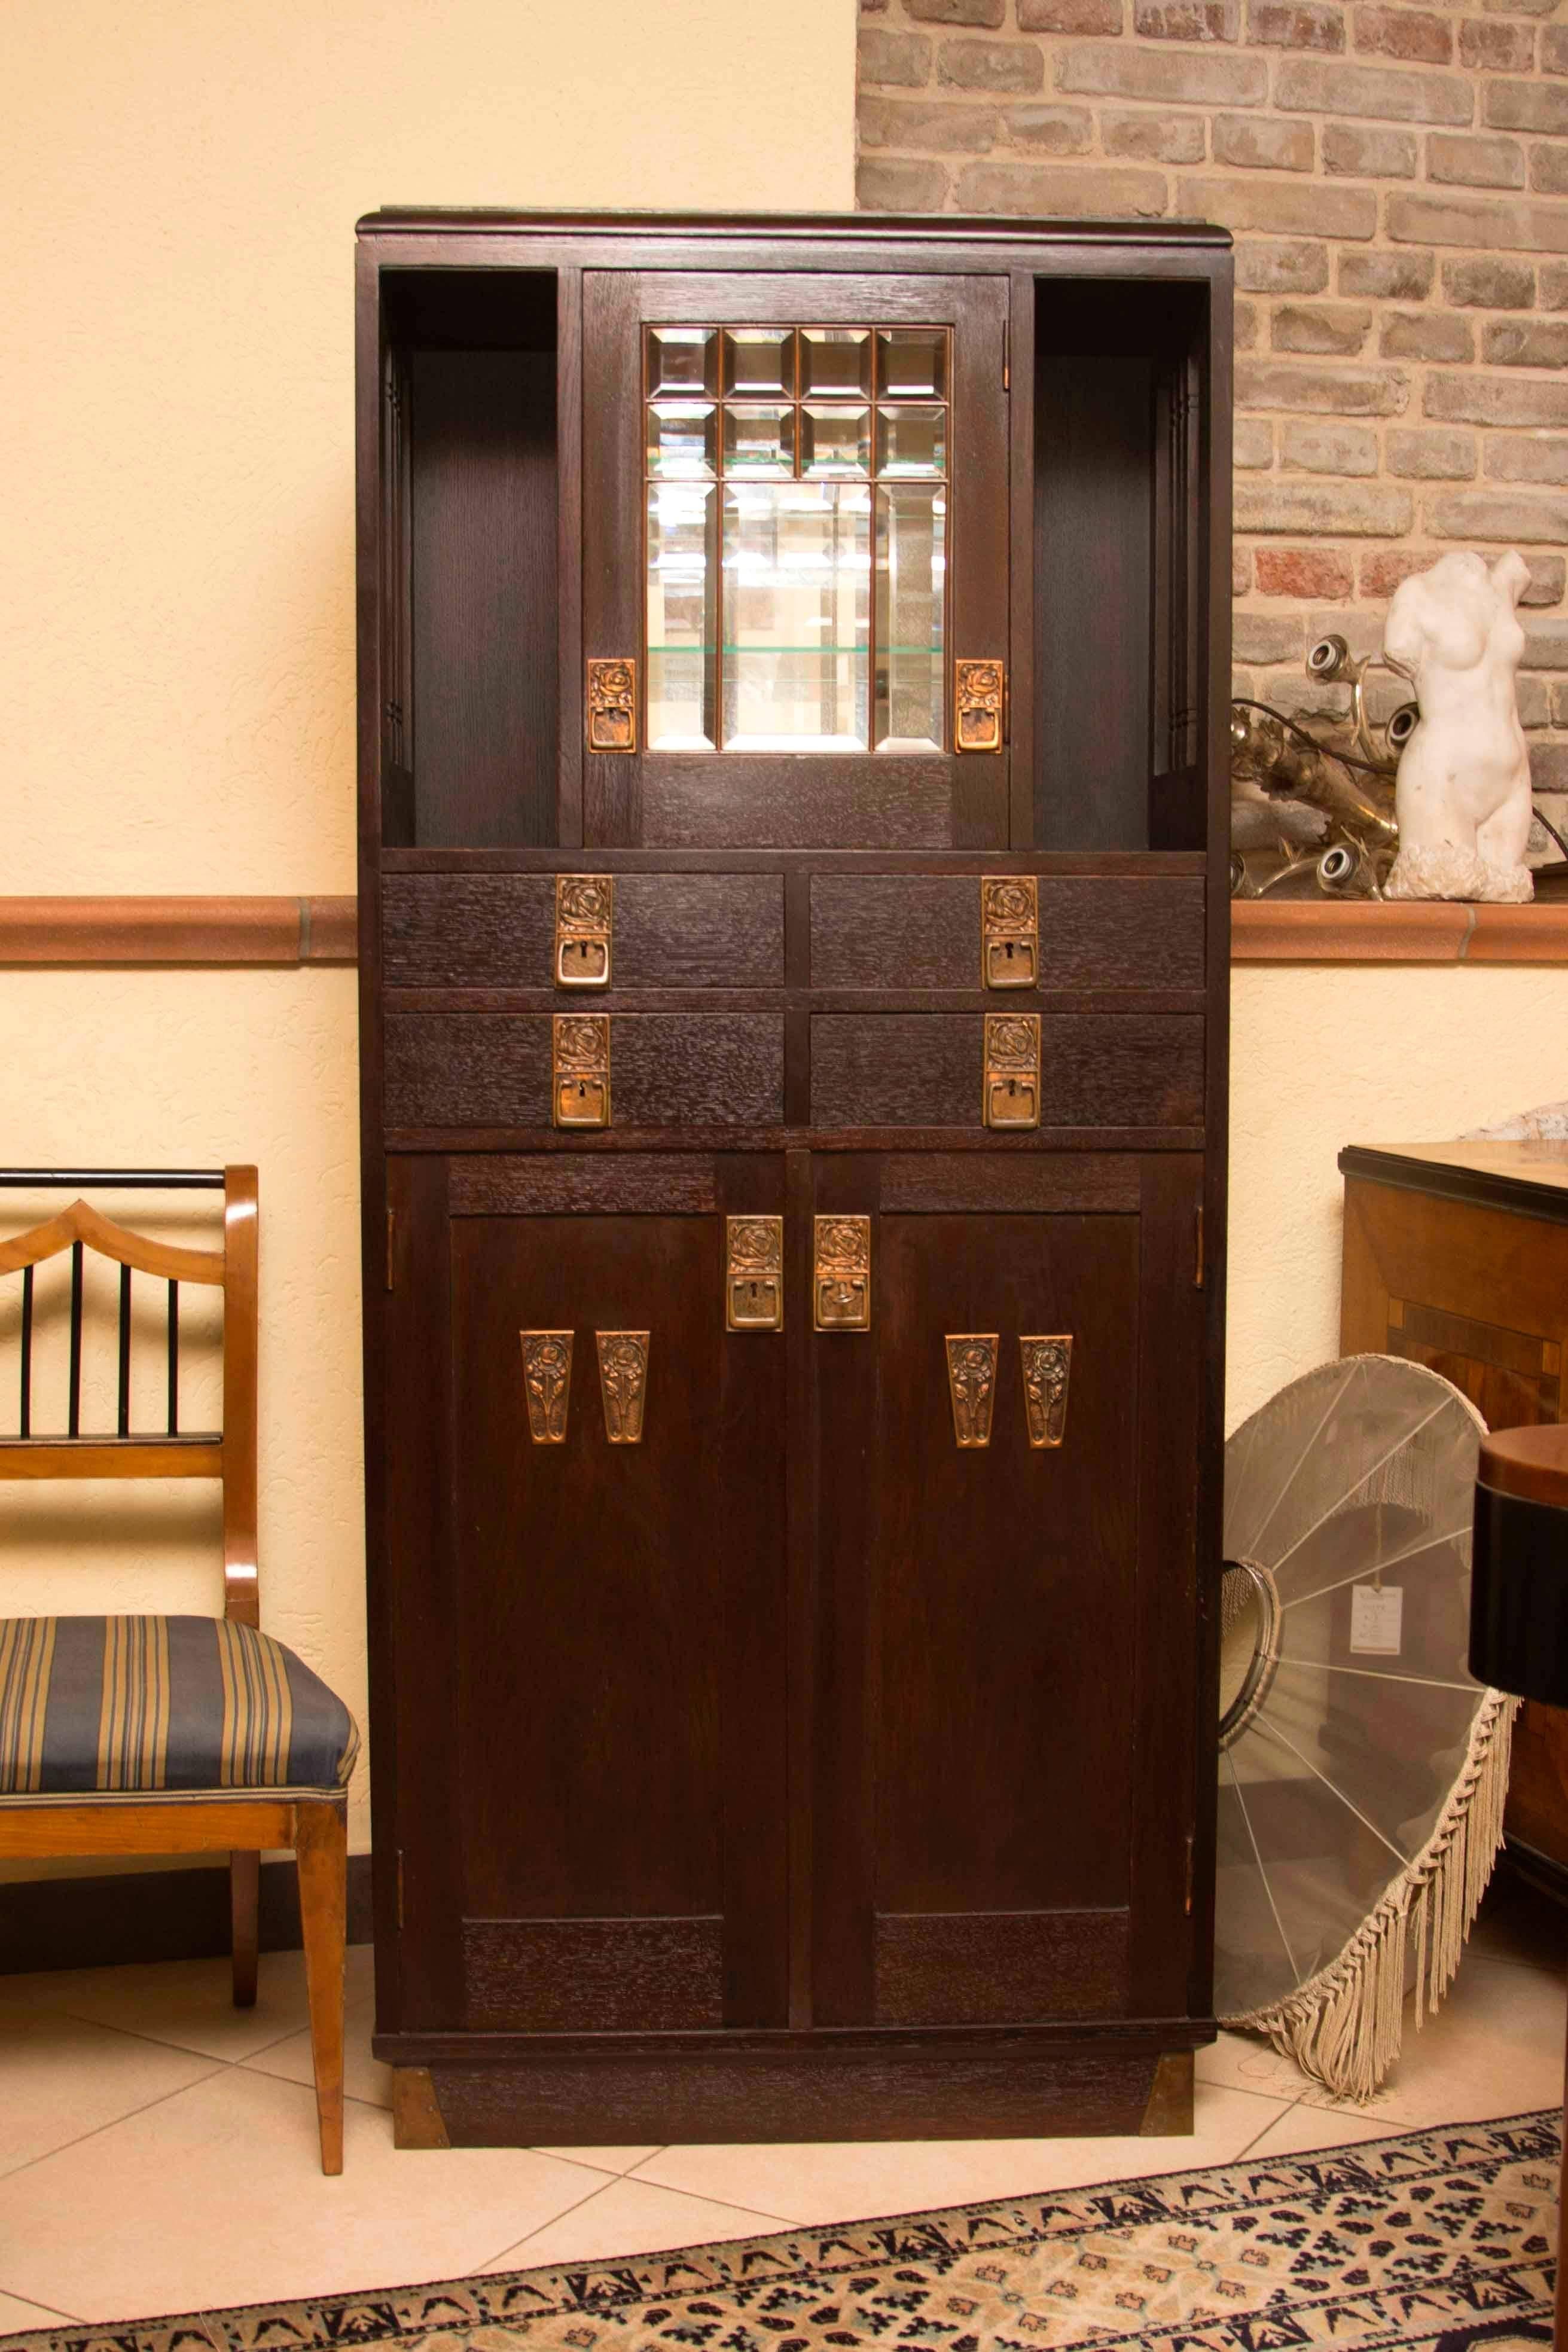 This Secession cabinet was produced in Austria-Hungary, circa 1910. It is made of oak wood. It features a glazed upper part with a bar and a beautiful brass fittings with decorative Art Nouveau elements. The side parts features a pillars typical for